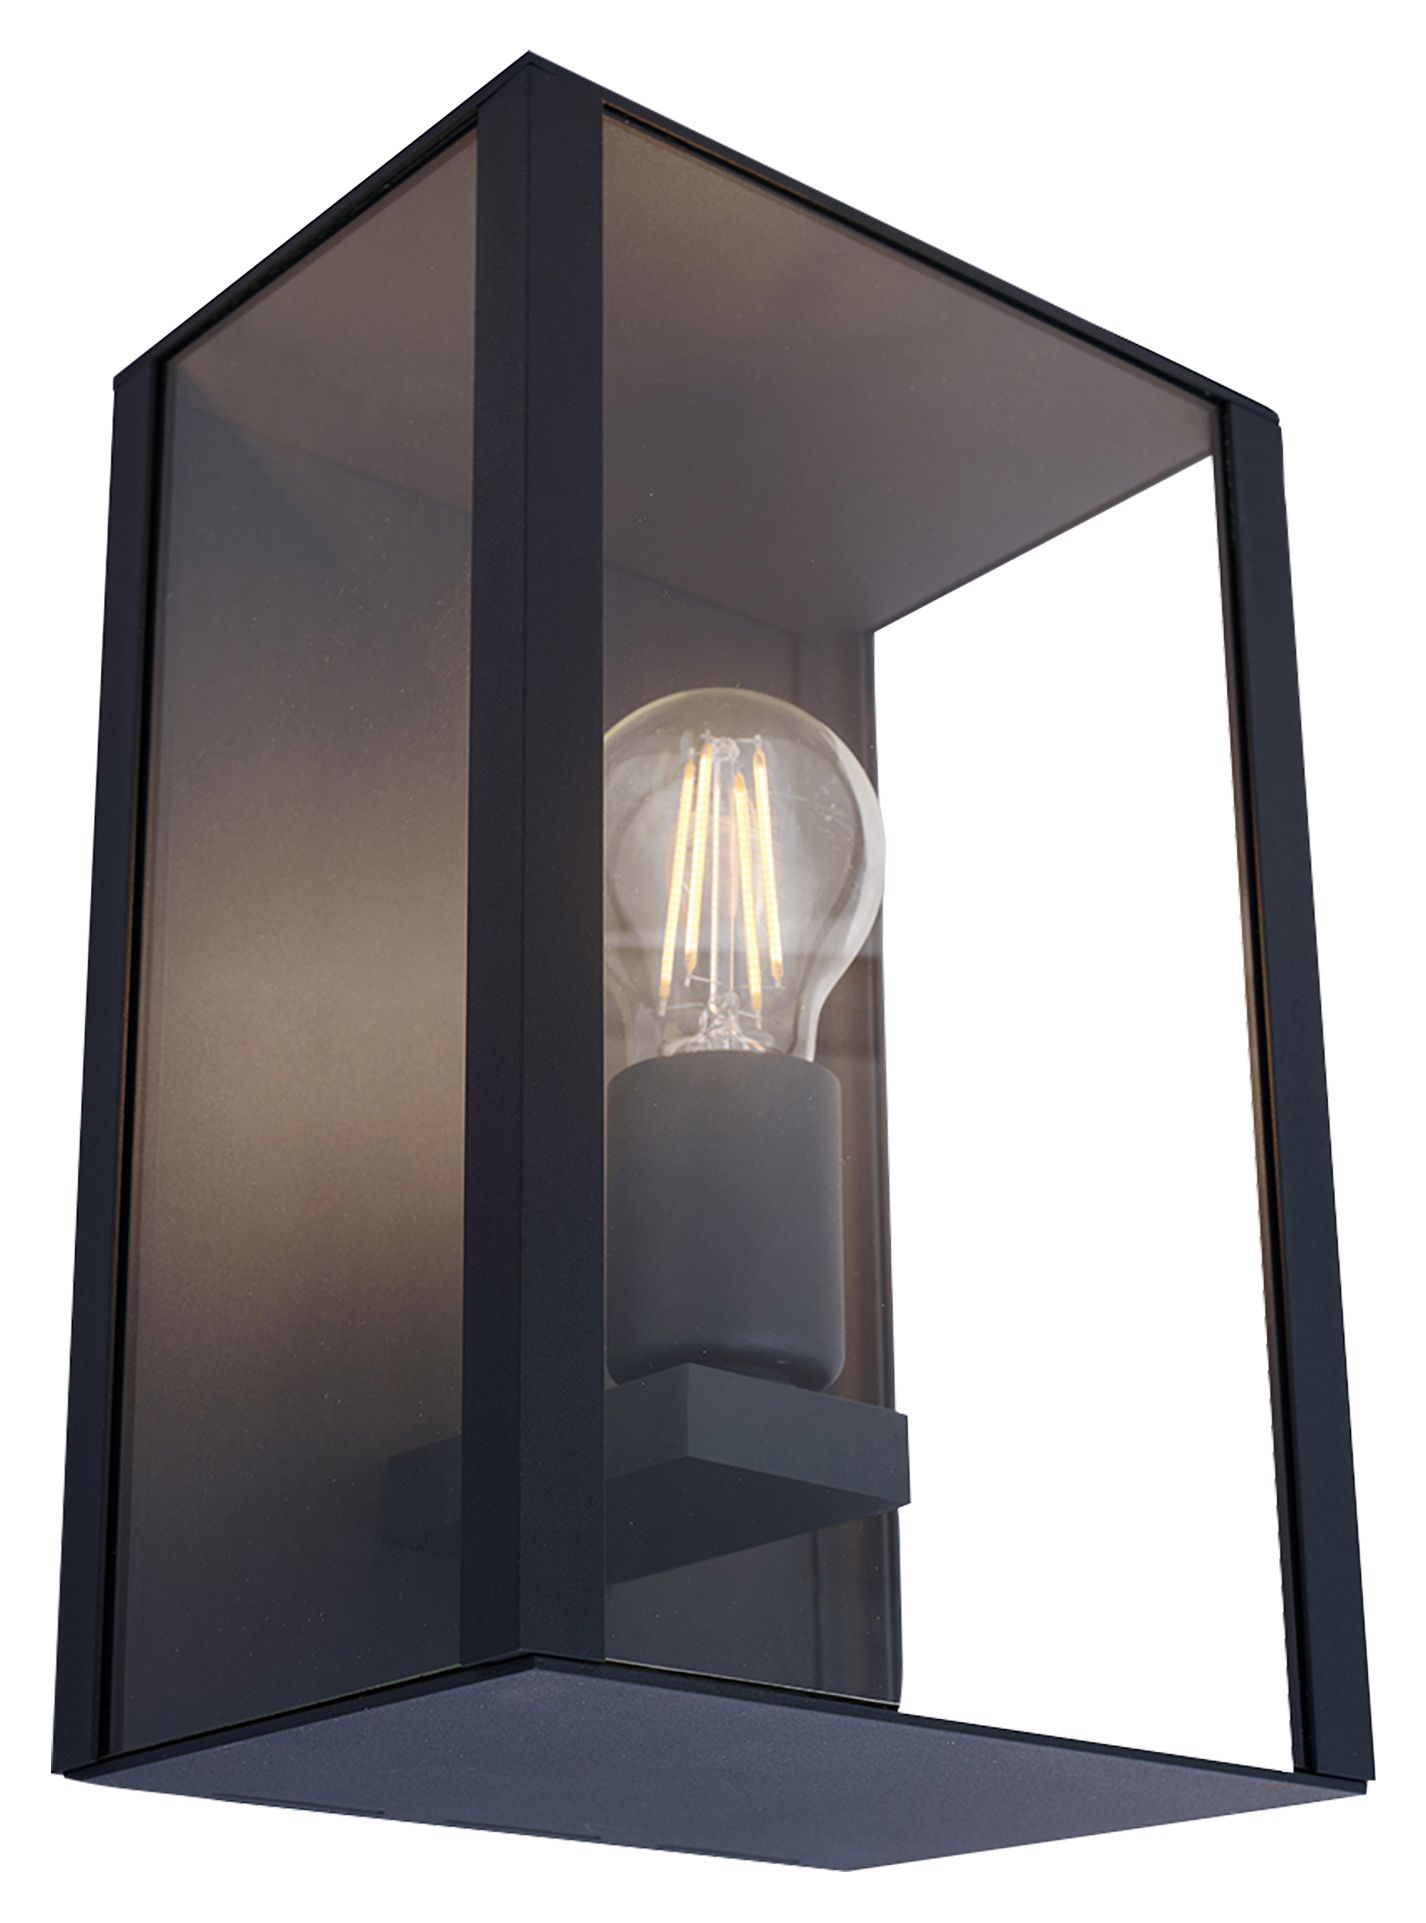 Image of 4lite WiZ Smart LED IP44 Exterior Wall Light with A60 E27 Filament Lamp